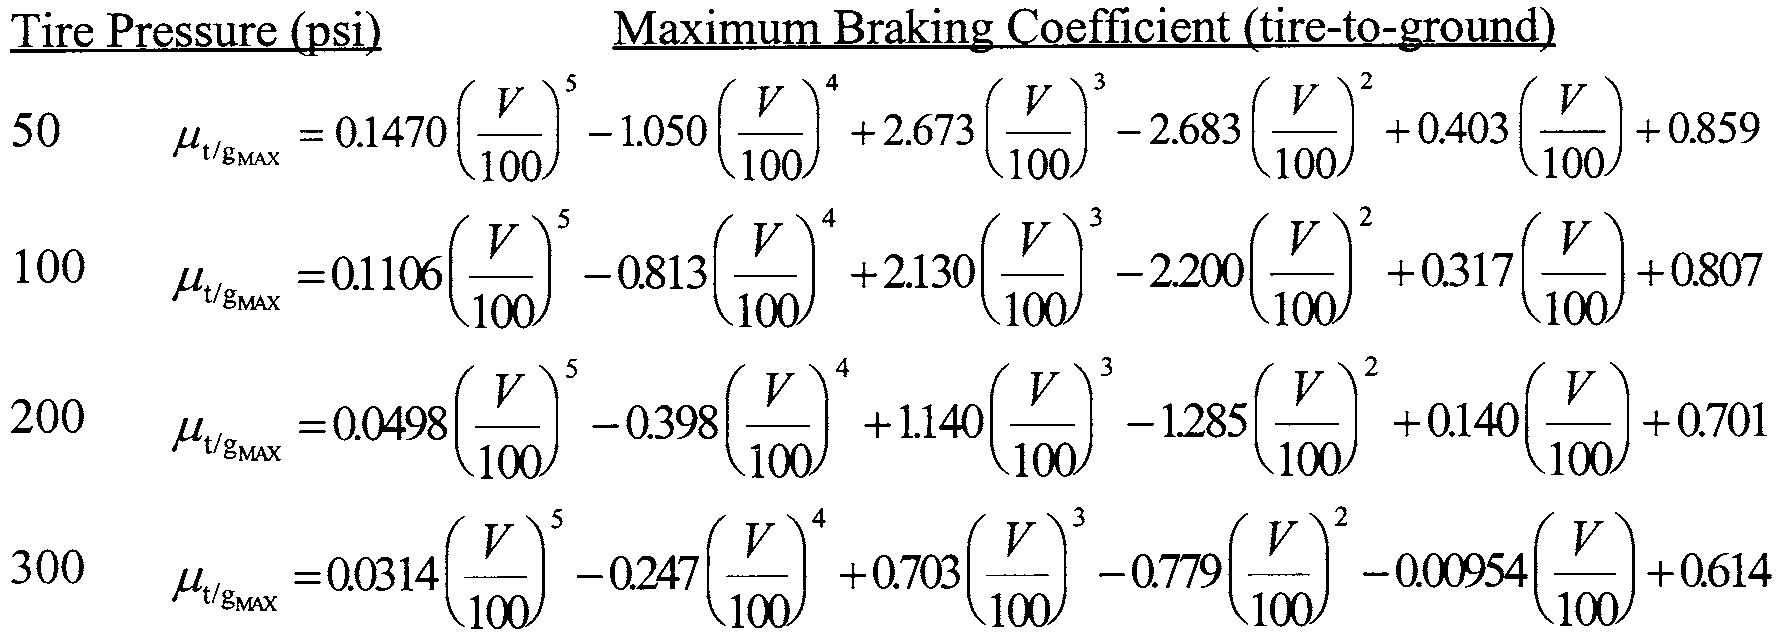 Graphic of (2) The wet runway braking coefficient defined in paragraph (c) of this section, except that a specific anti-skid system efficiency, if determined, is appropriate for a grooved or porous friction course wet runway, and the maximum tire-to-ground wet runway braking coefficient of friction is defined as